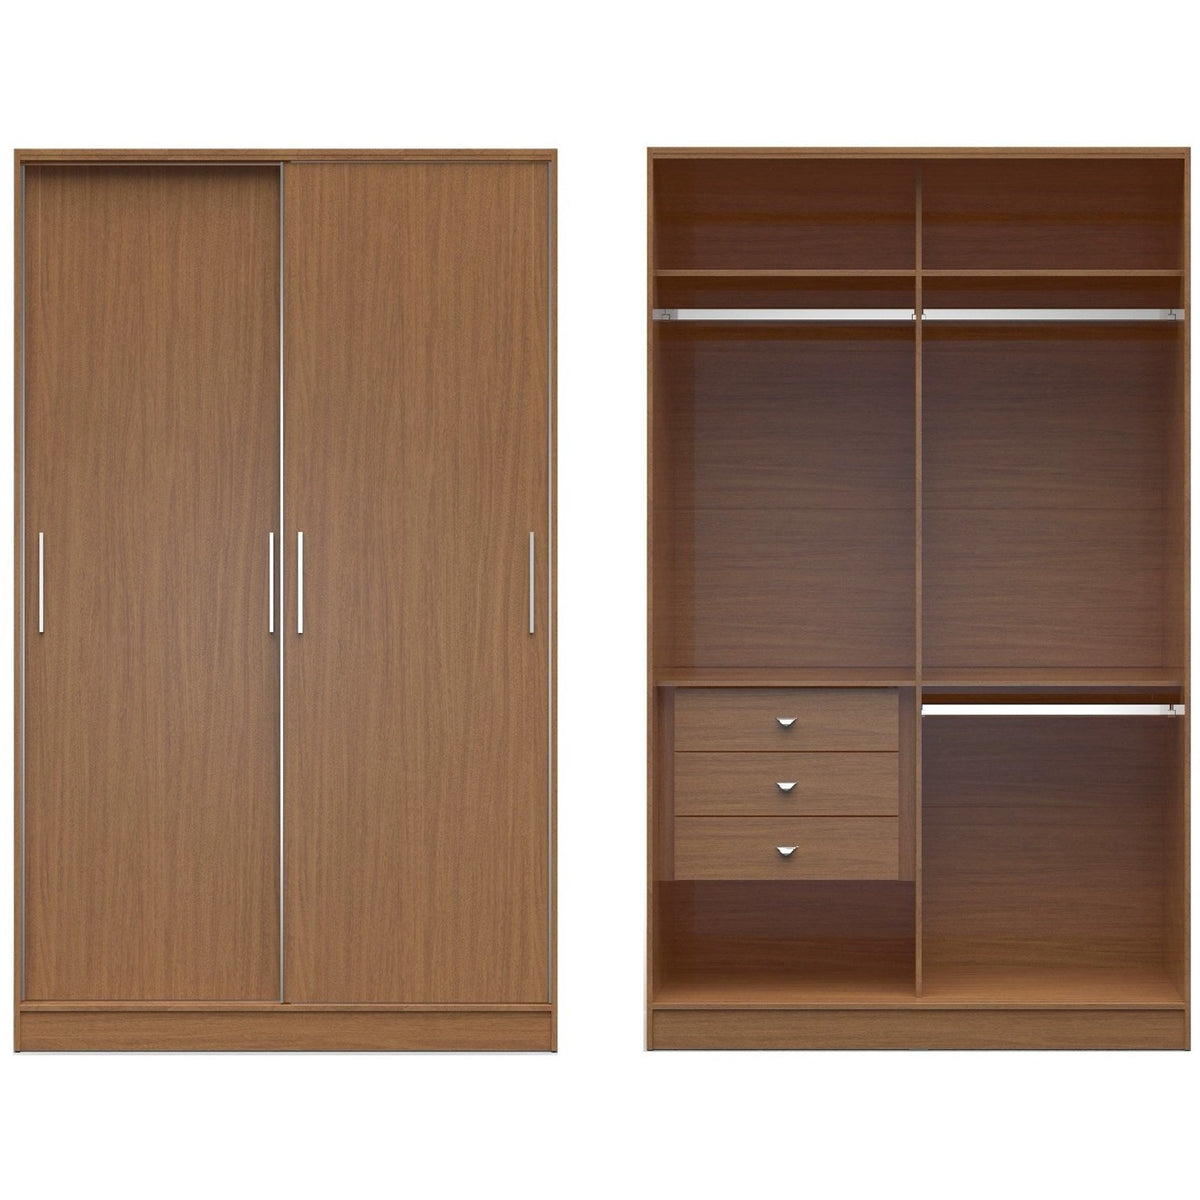 Manhattan Comfort Chelsea 1.0 - 54.33 inch Wide Double Basic Wardrobe with 3 Drawers and 2 Sliding Doors in Maple Cream-Minimal & Modern